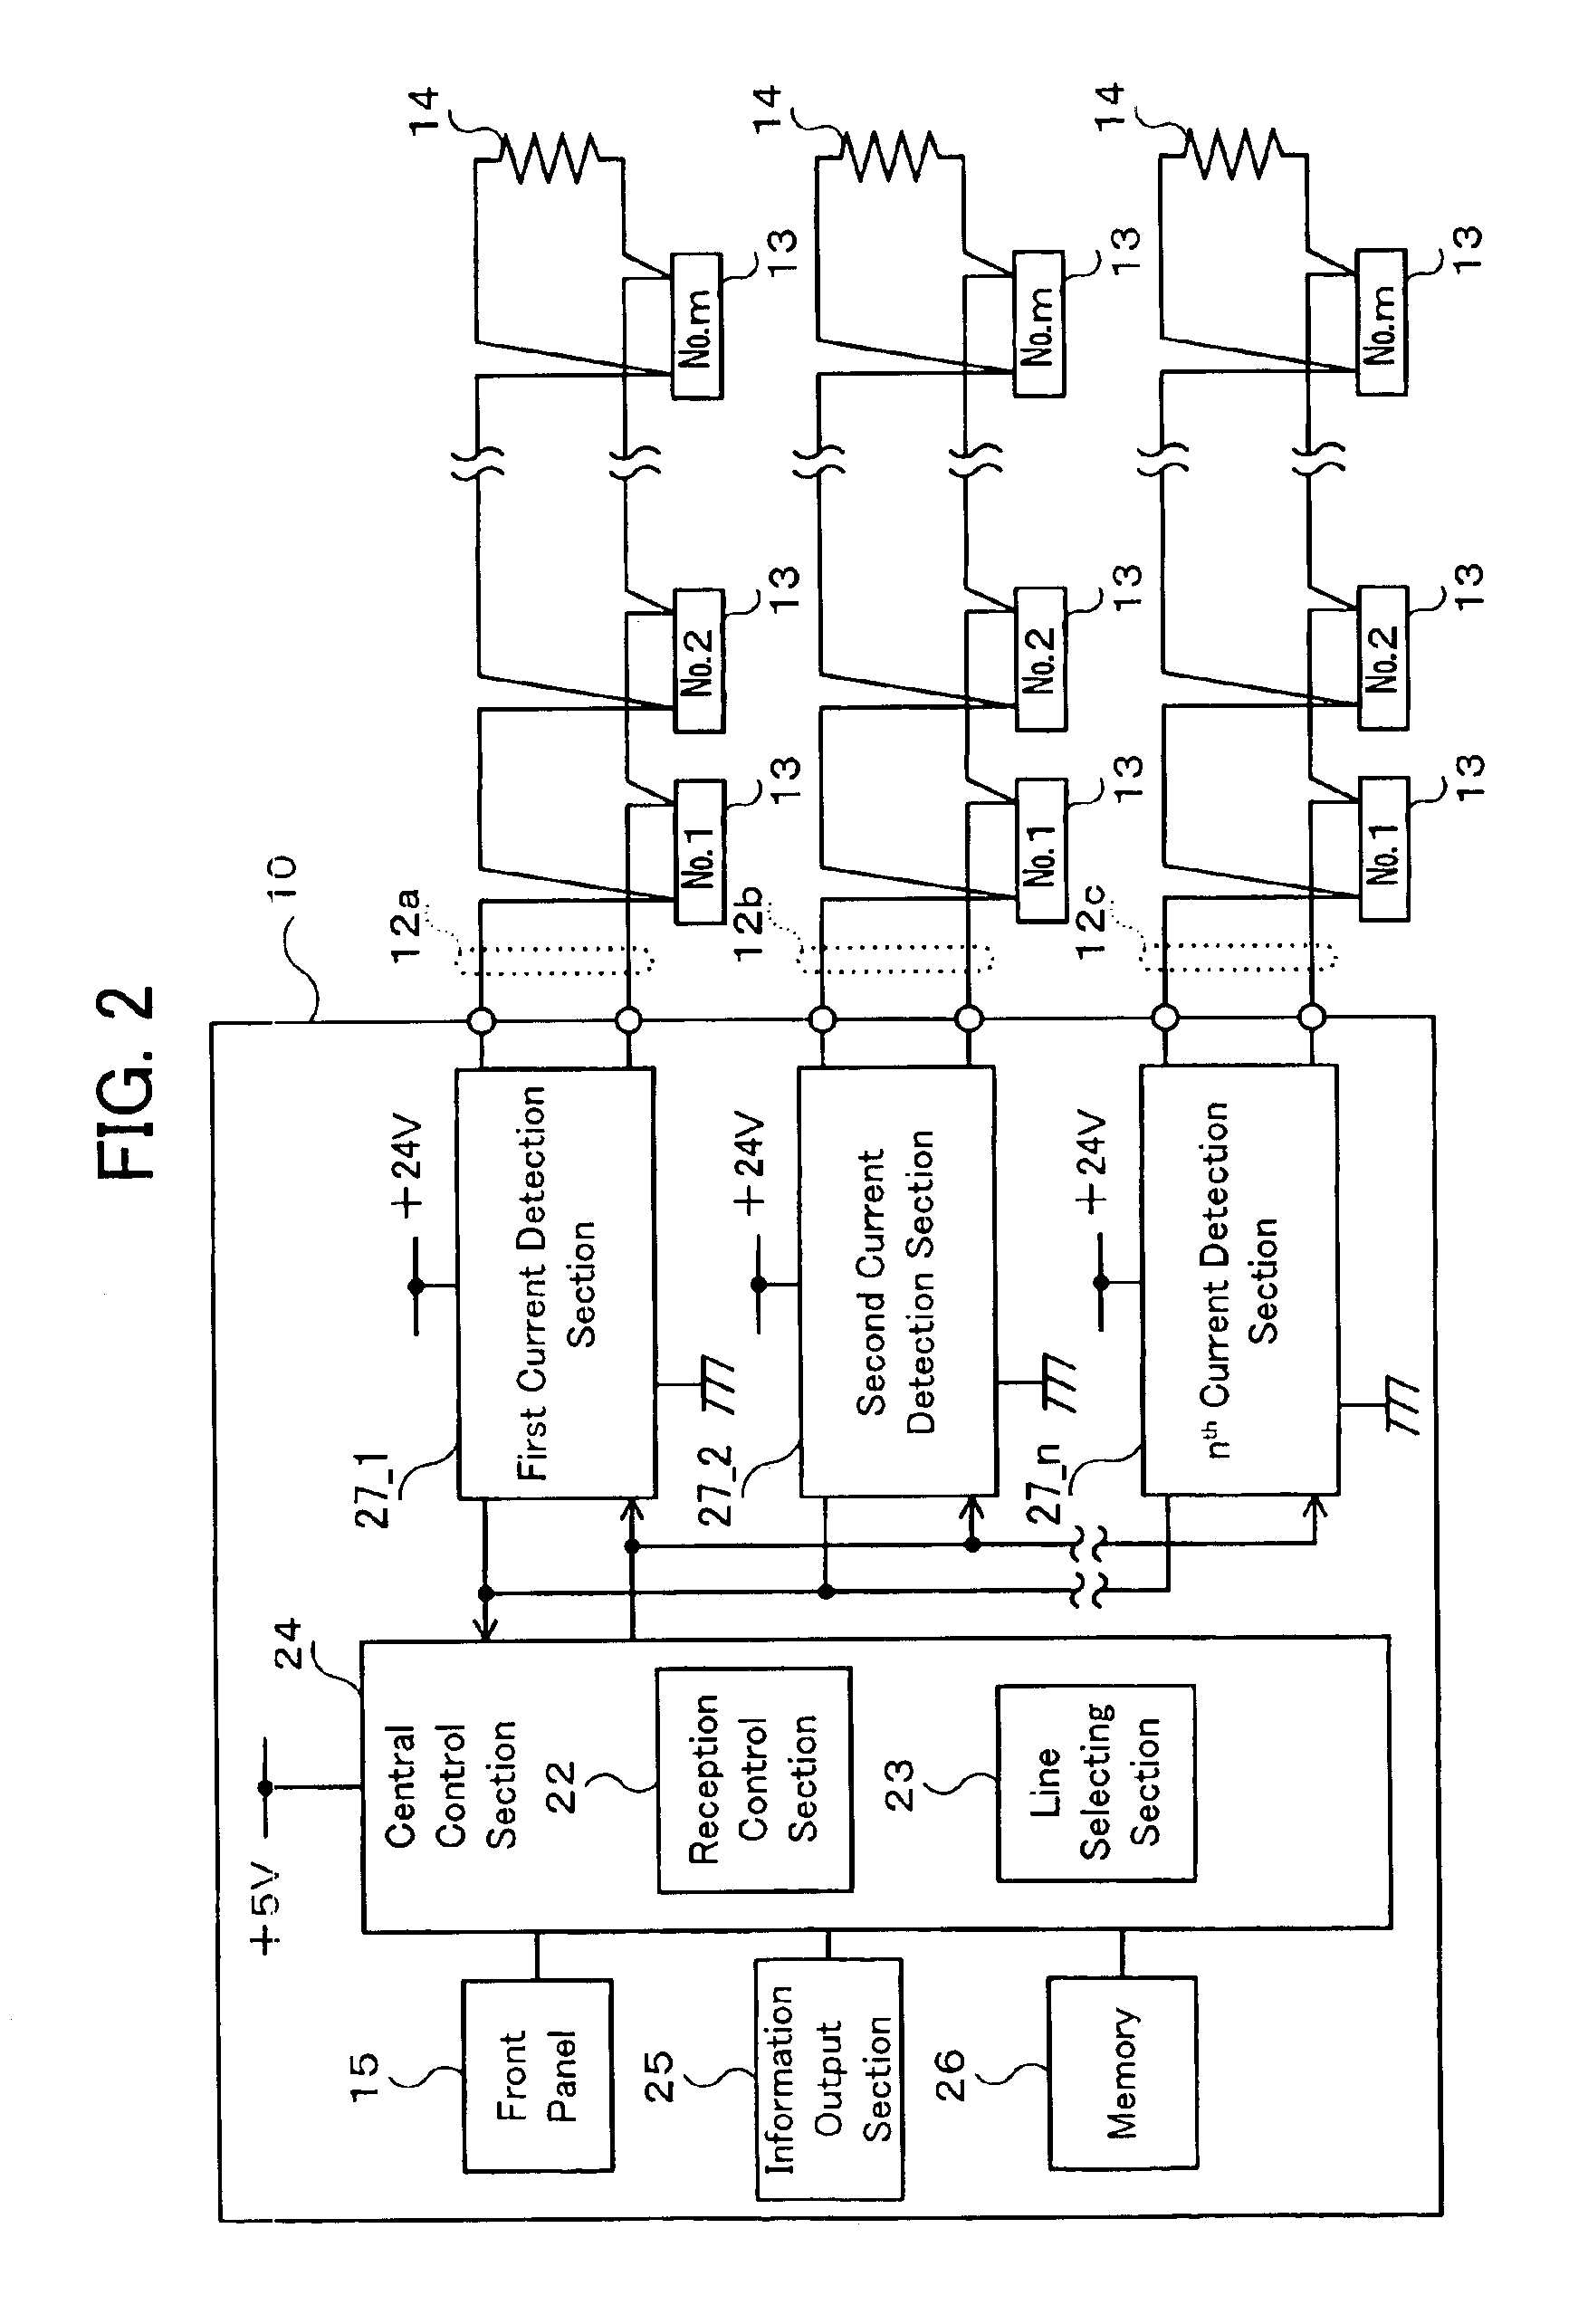 Fire alarm system, fire sensor, fire receiver, and repeater